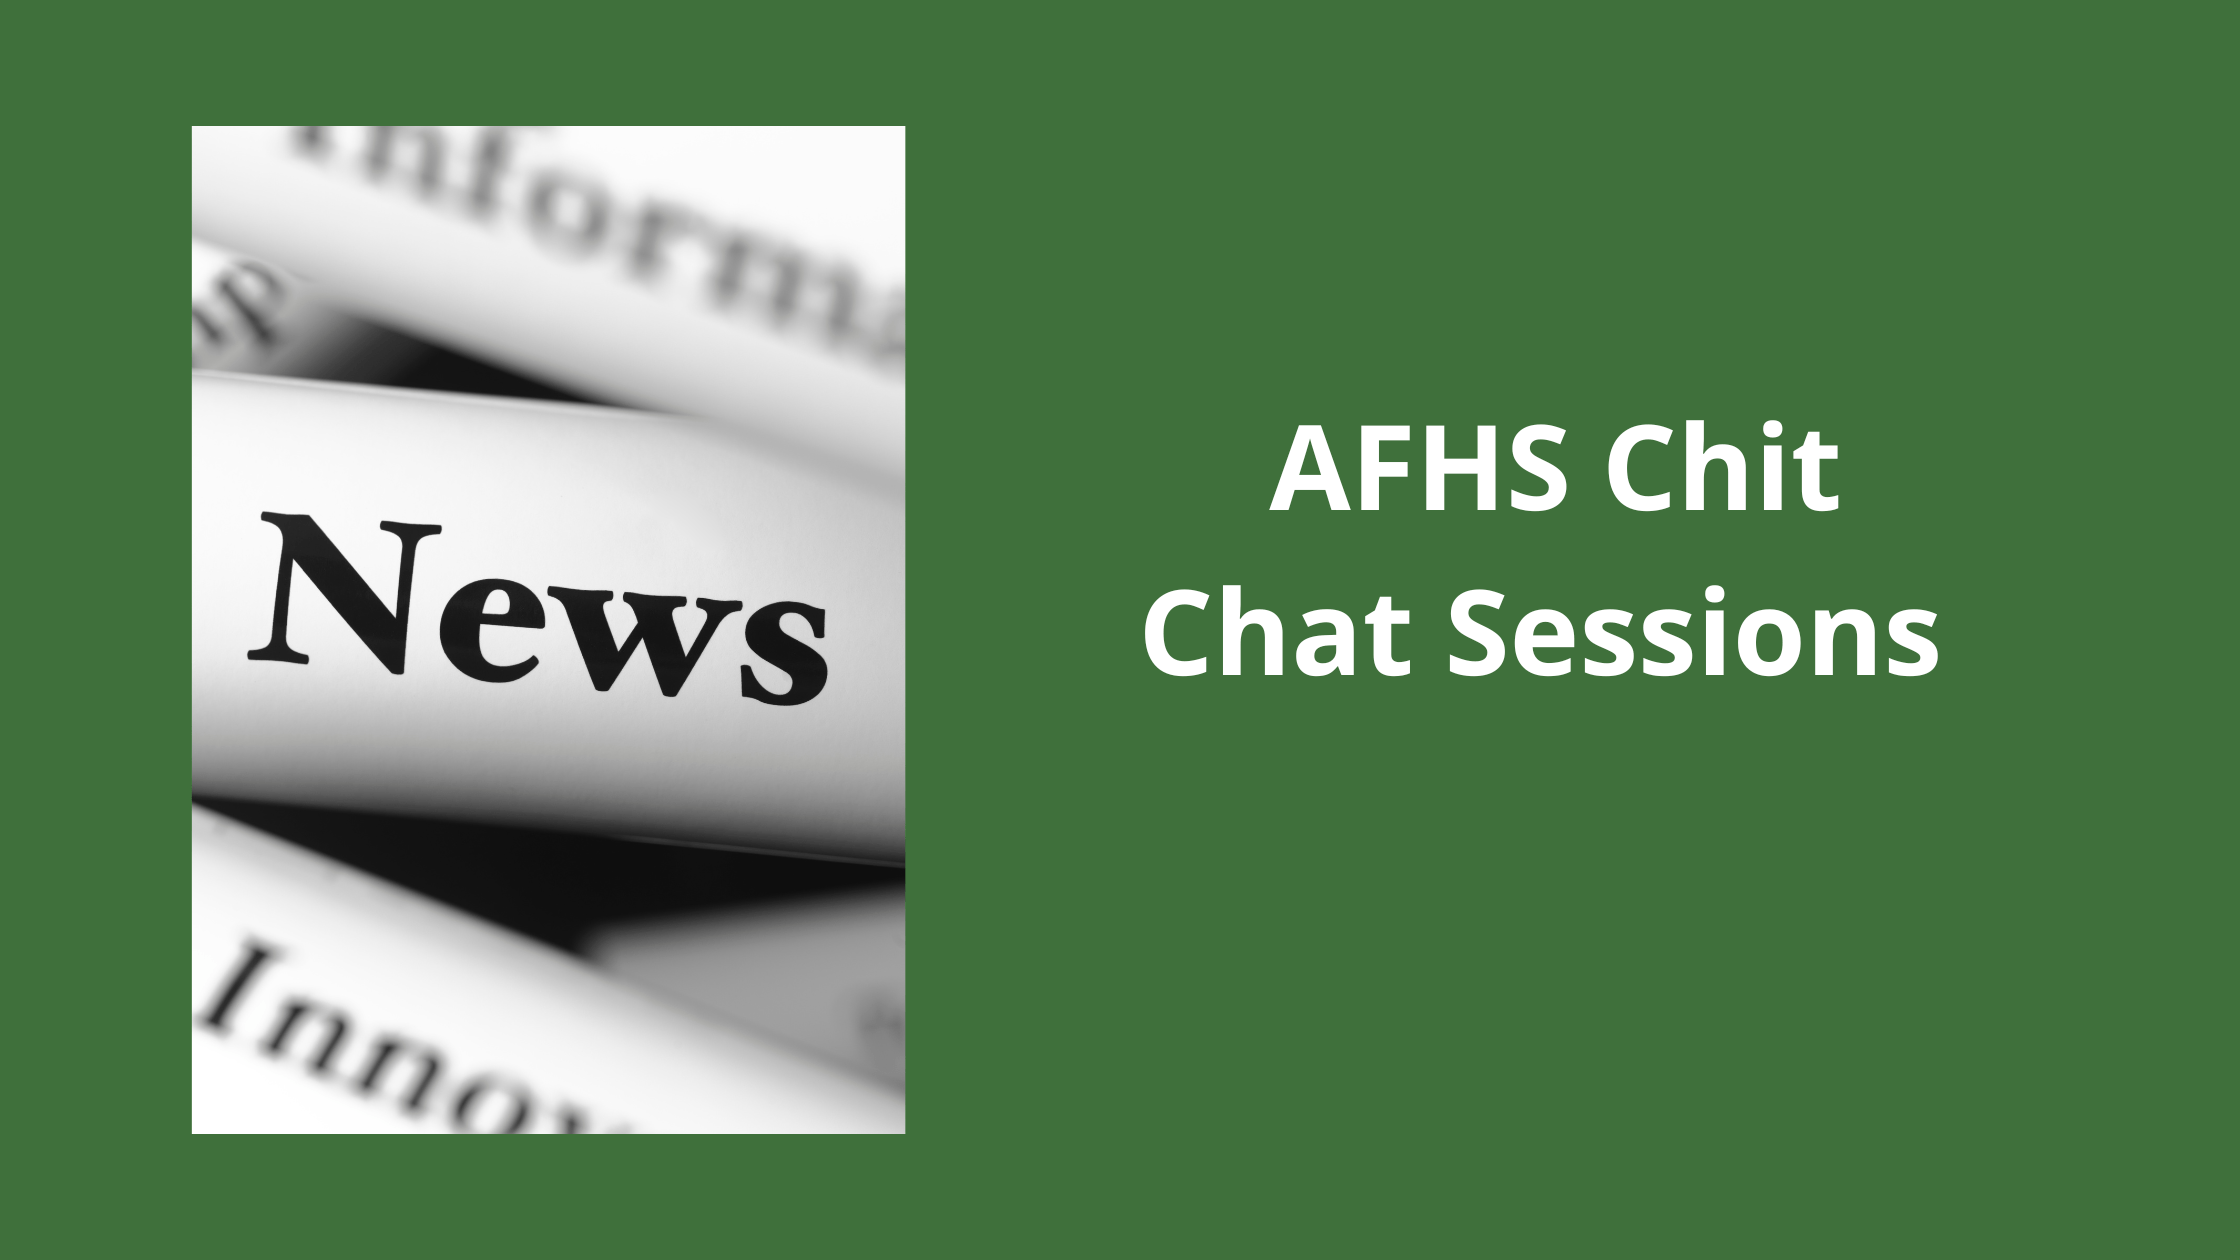 AFHS Chit Chat Session